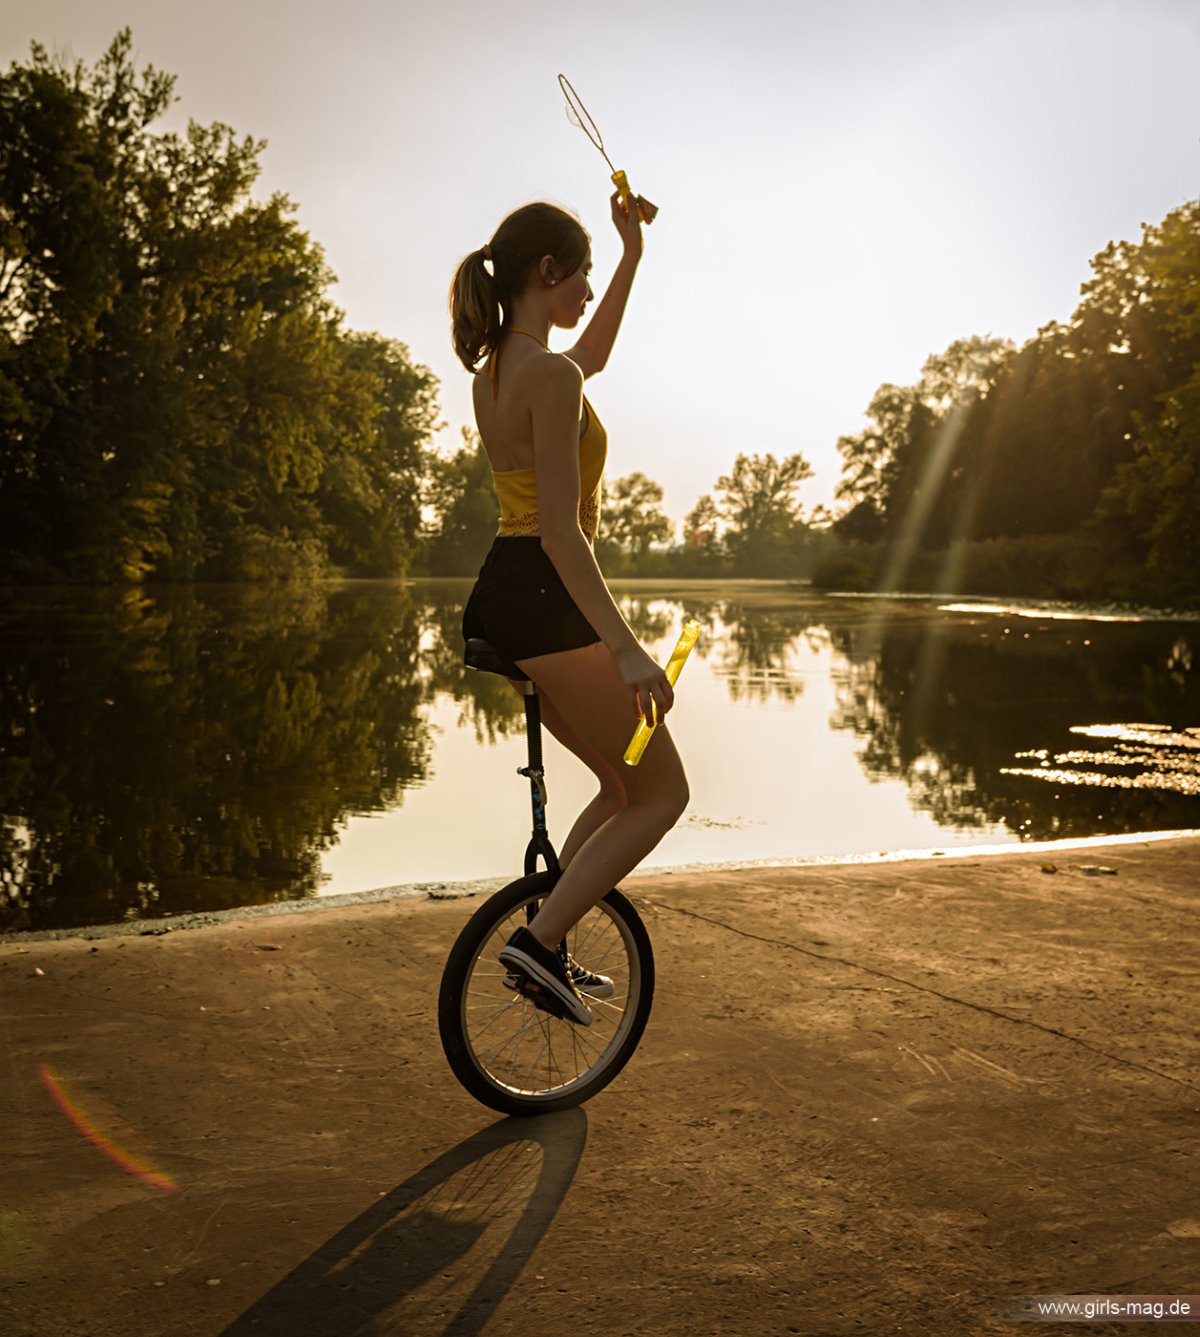 Girls Mag Annika Bubbles on a Unicycle 0124 9661918993.jpg